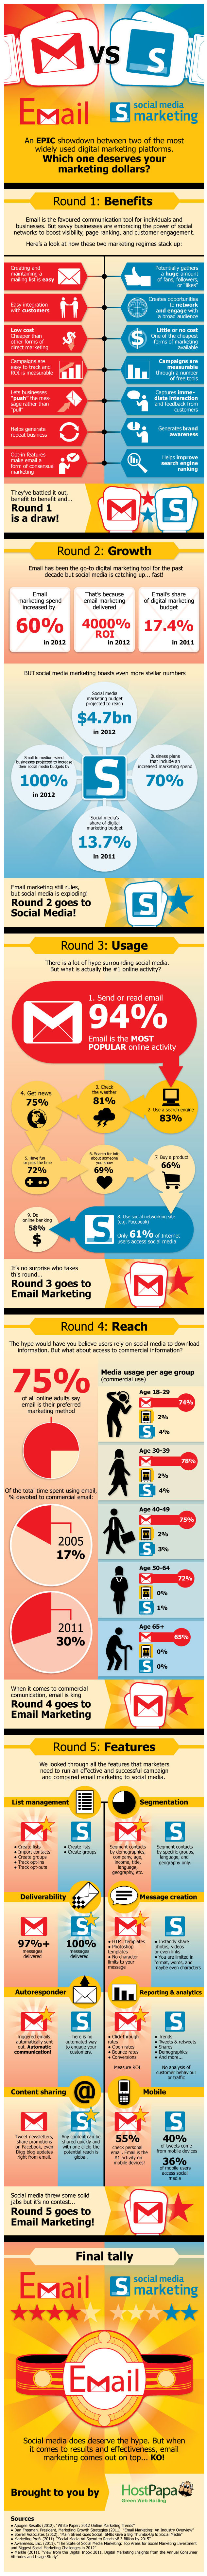 Email Marketing Knocks Out Social Media in 5 Rounds 1